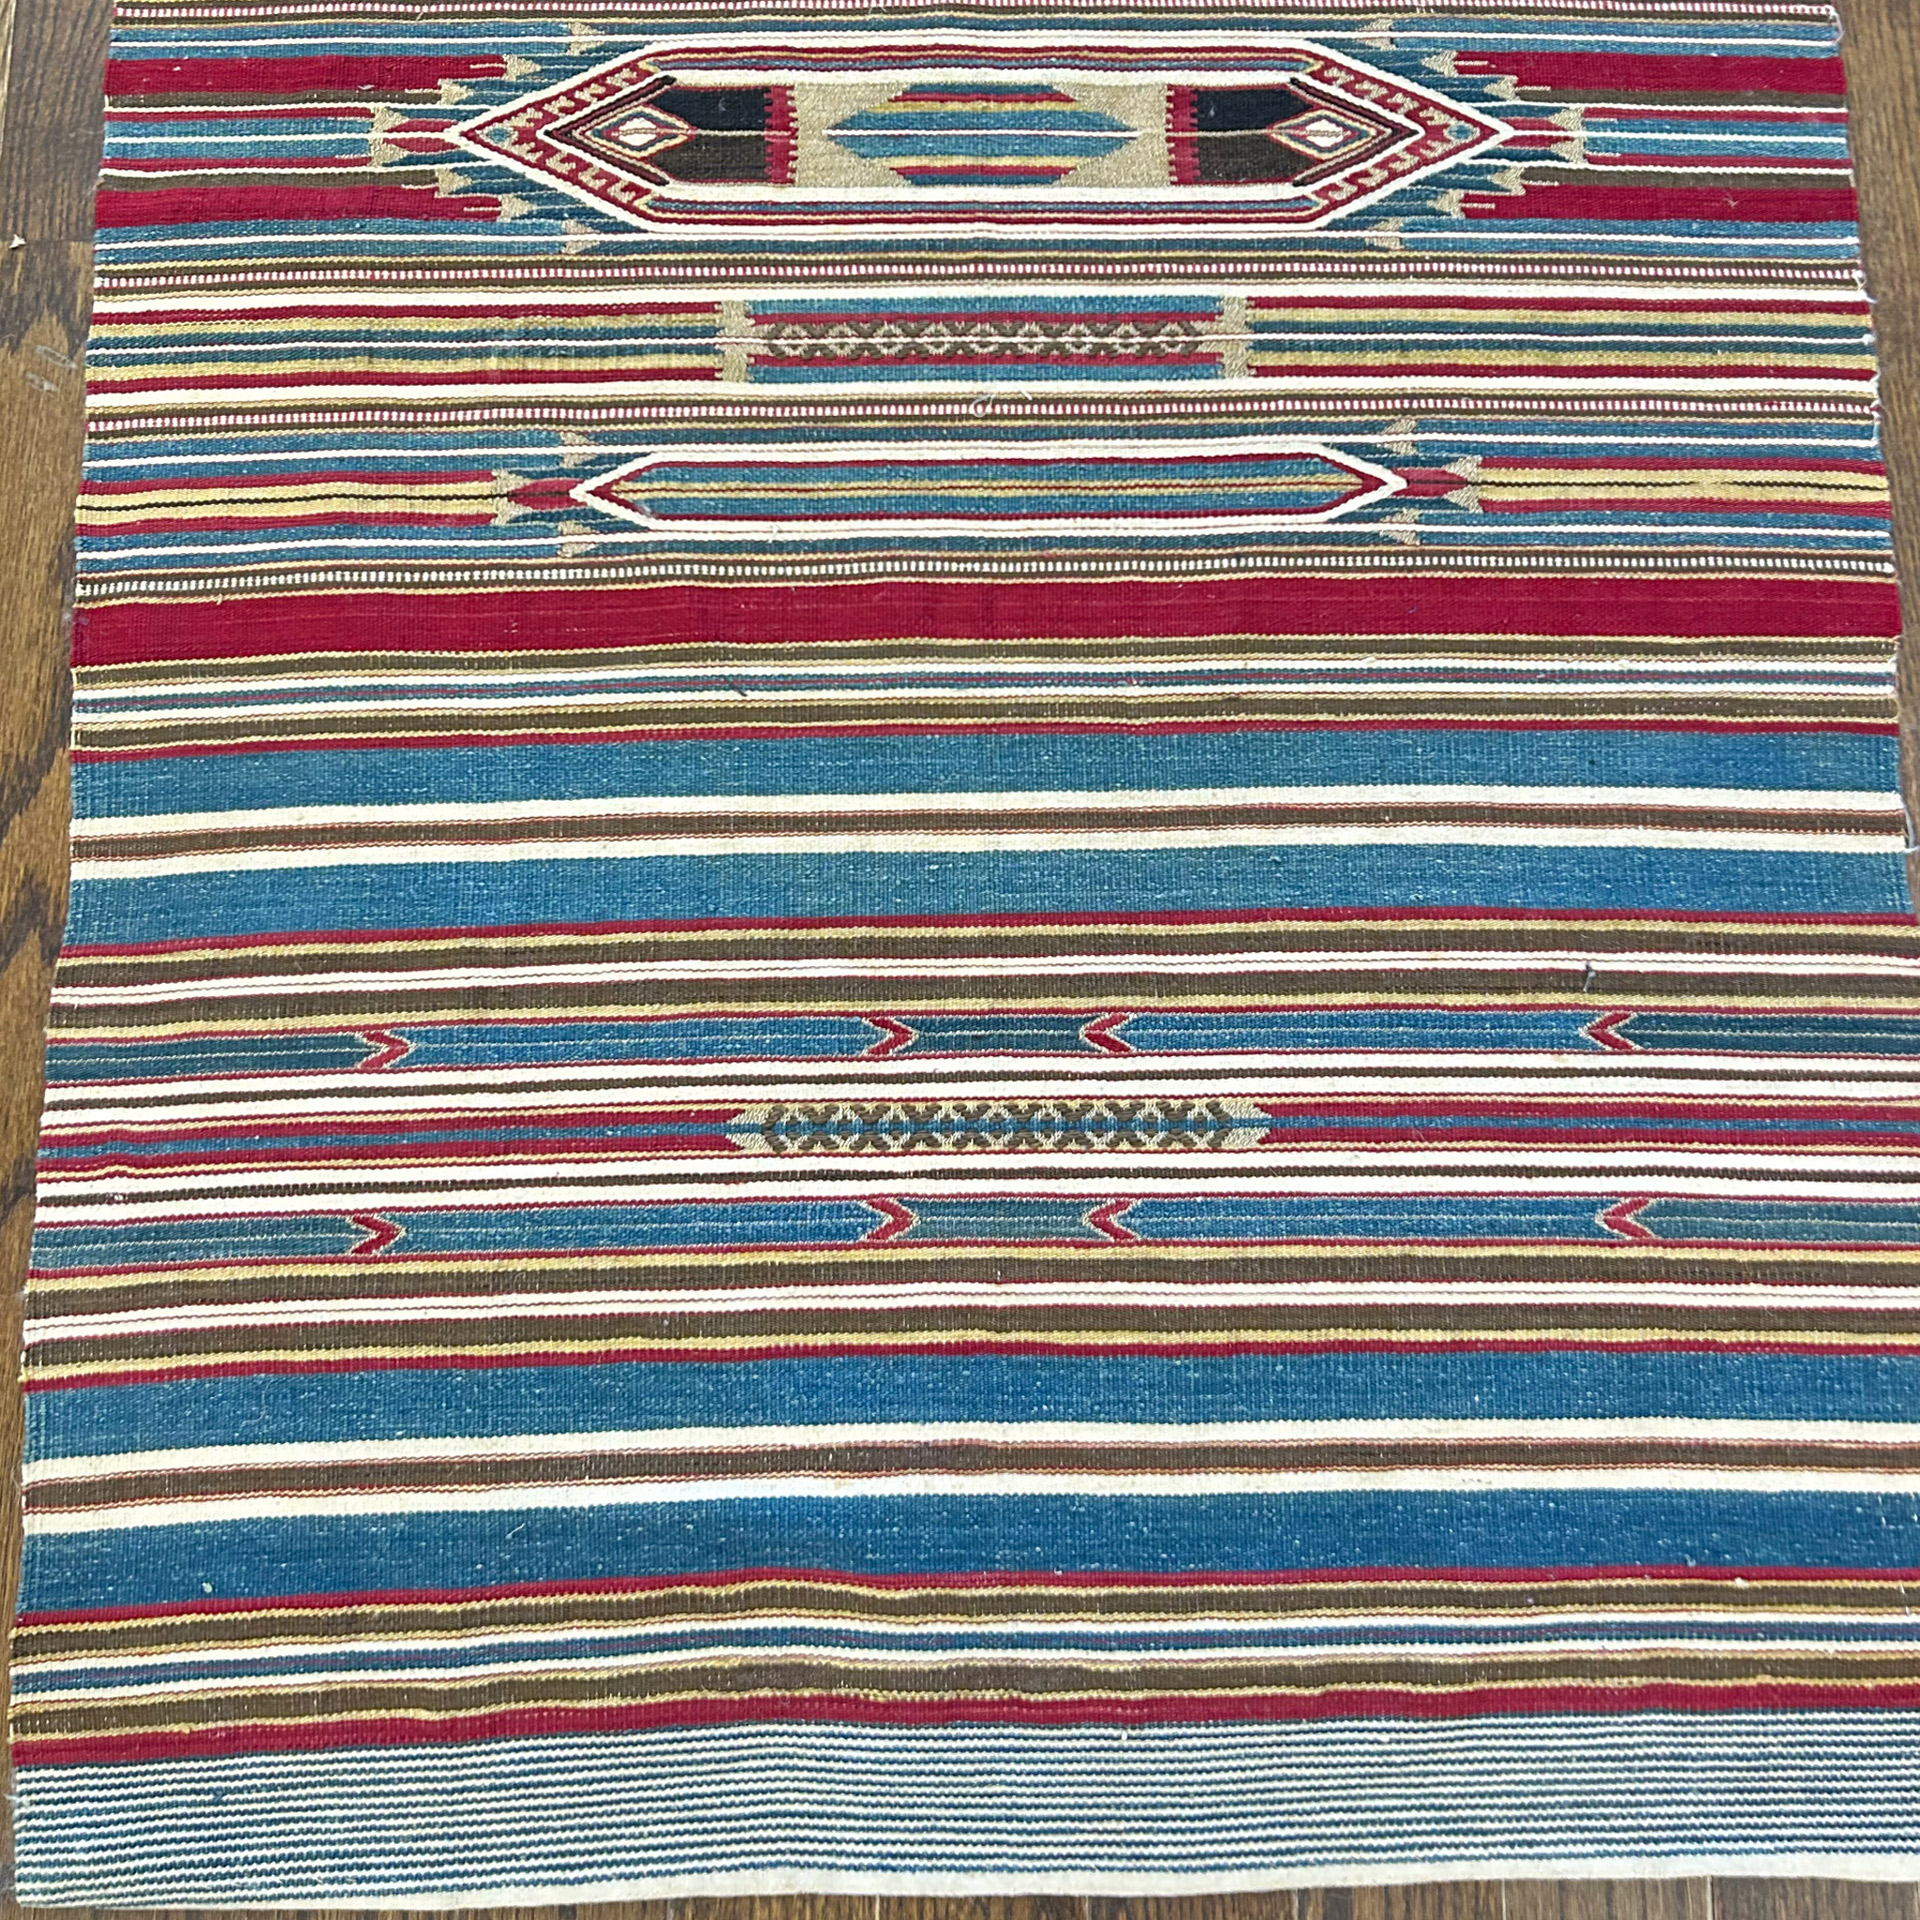 Antique Armenian kilim (flat woven rug), woven in Syria after the Turkish Armenian Genocide that took place circa 1915-1916. This magnificent kilim runner rug, made of wool with silk and metal thread highlights, was probably woven in the 1920s. Douglas Stock Gallery, antique Oriental rugs Boston,MA area